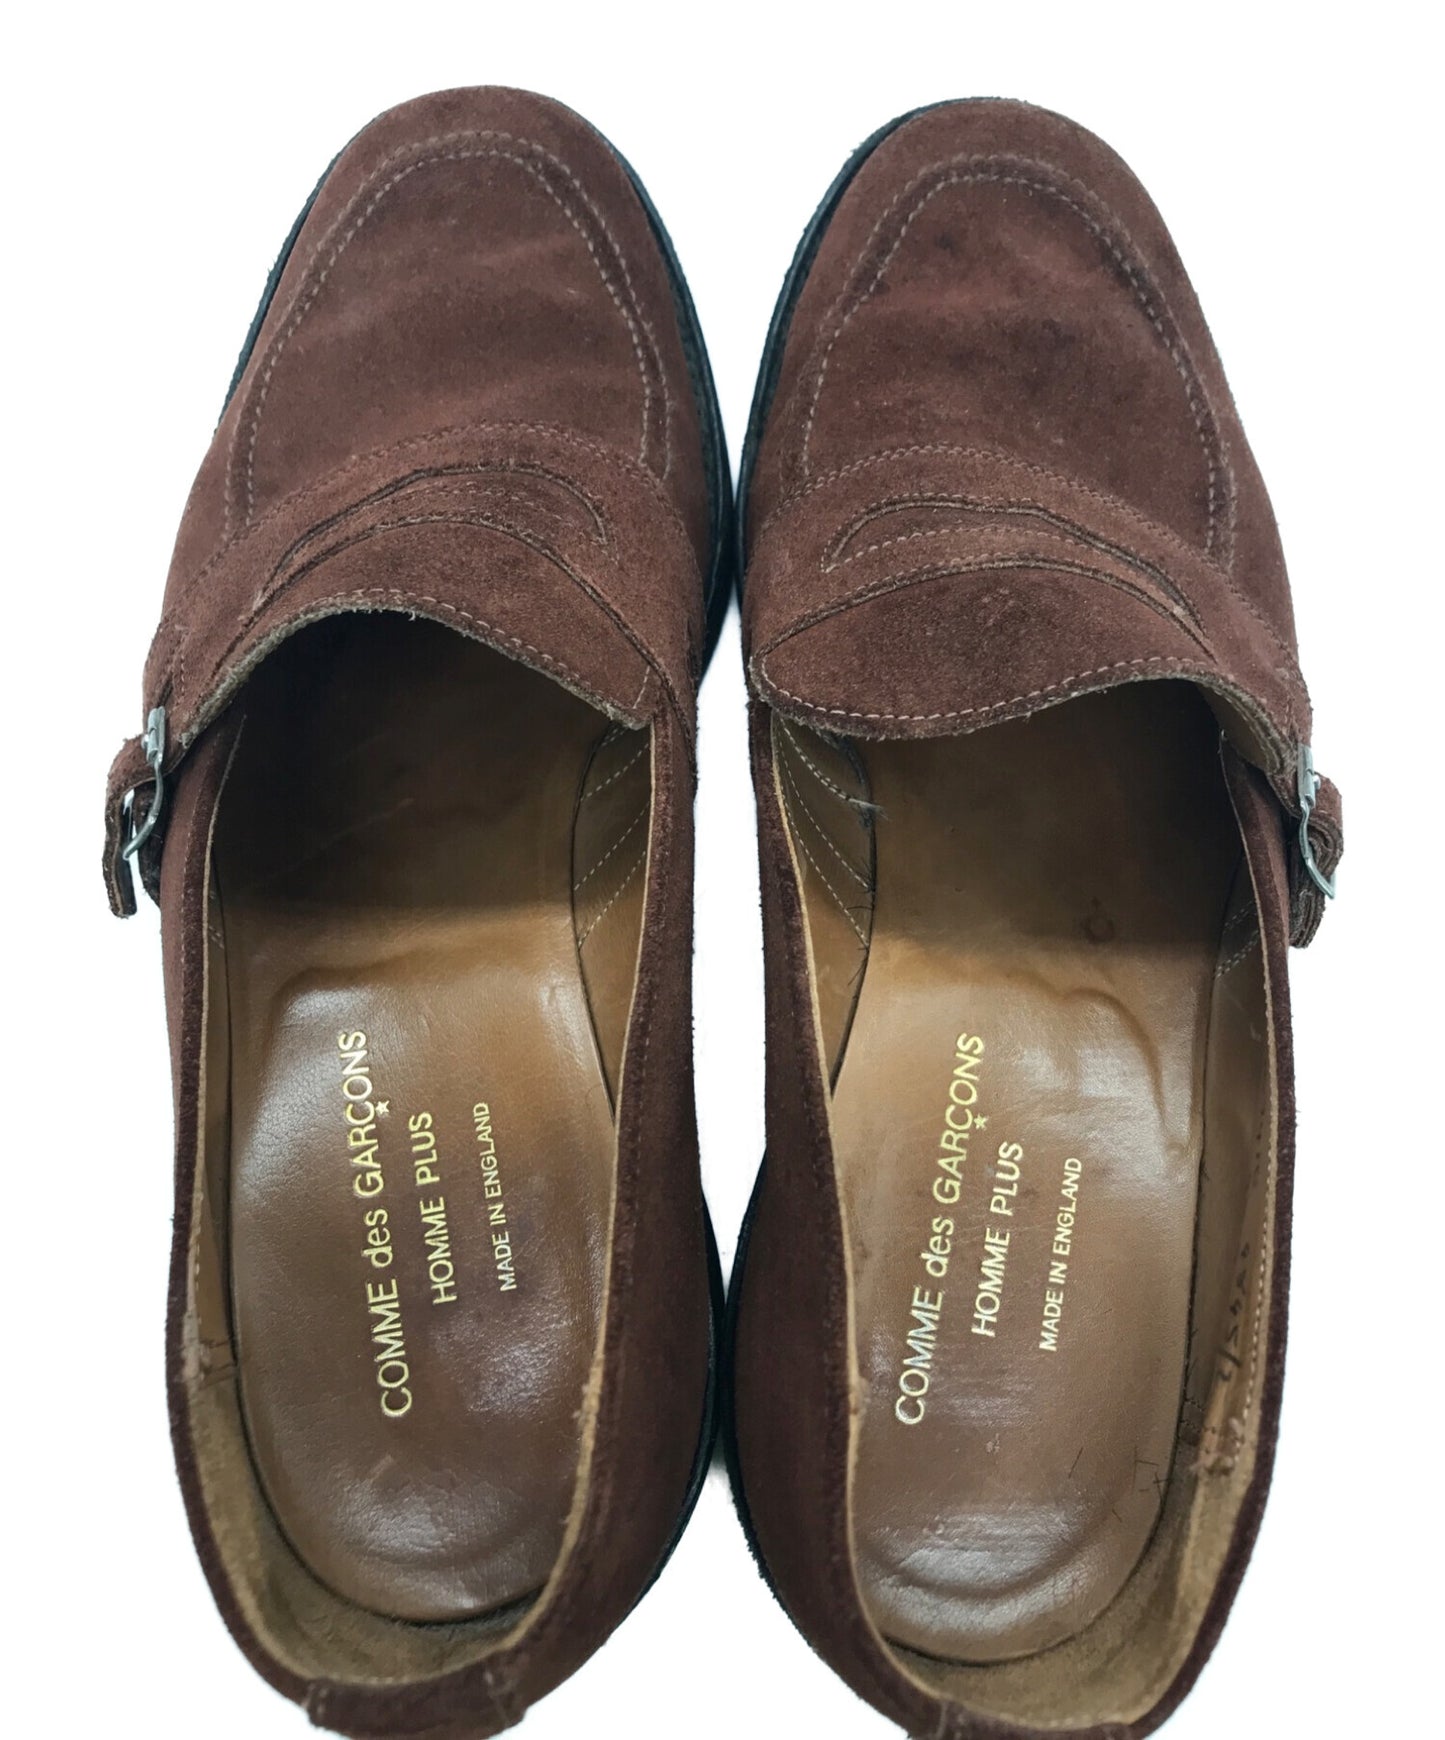 Comme des Garcons Homme Plus Suede Coin Loafer